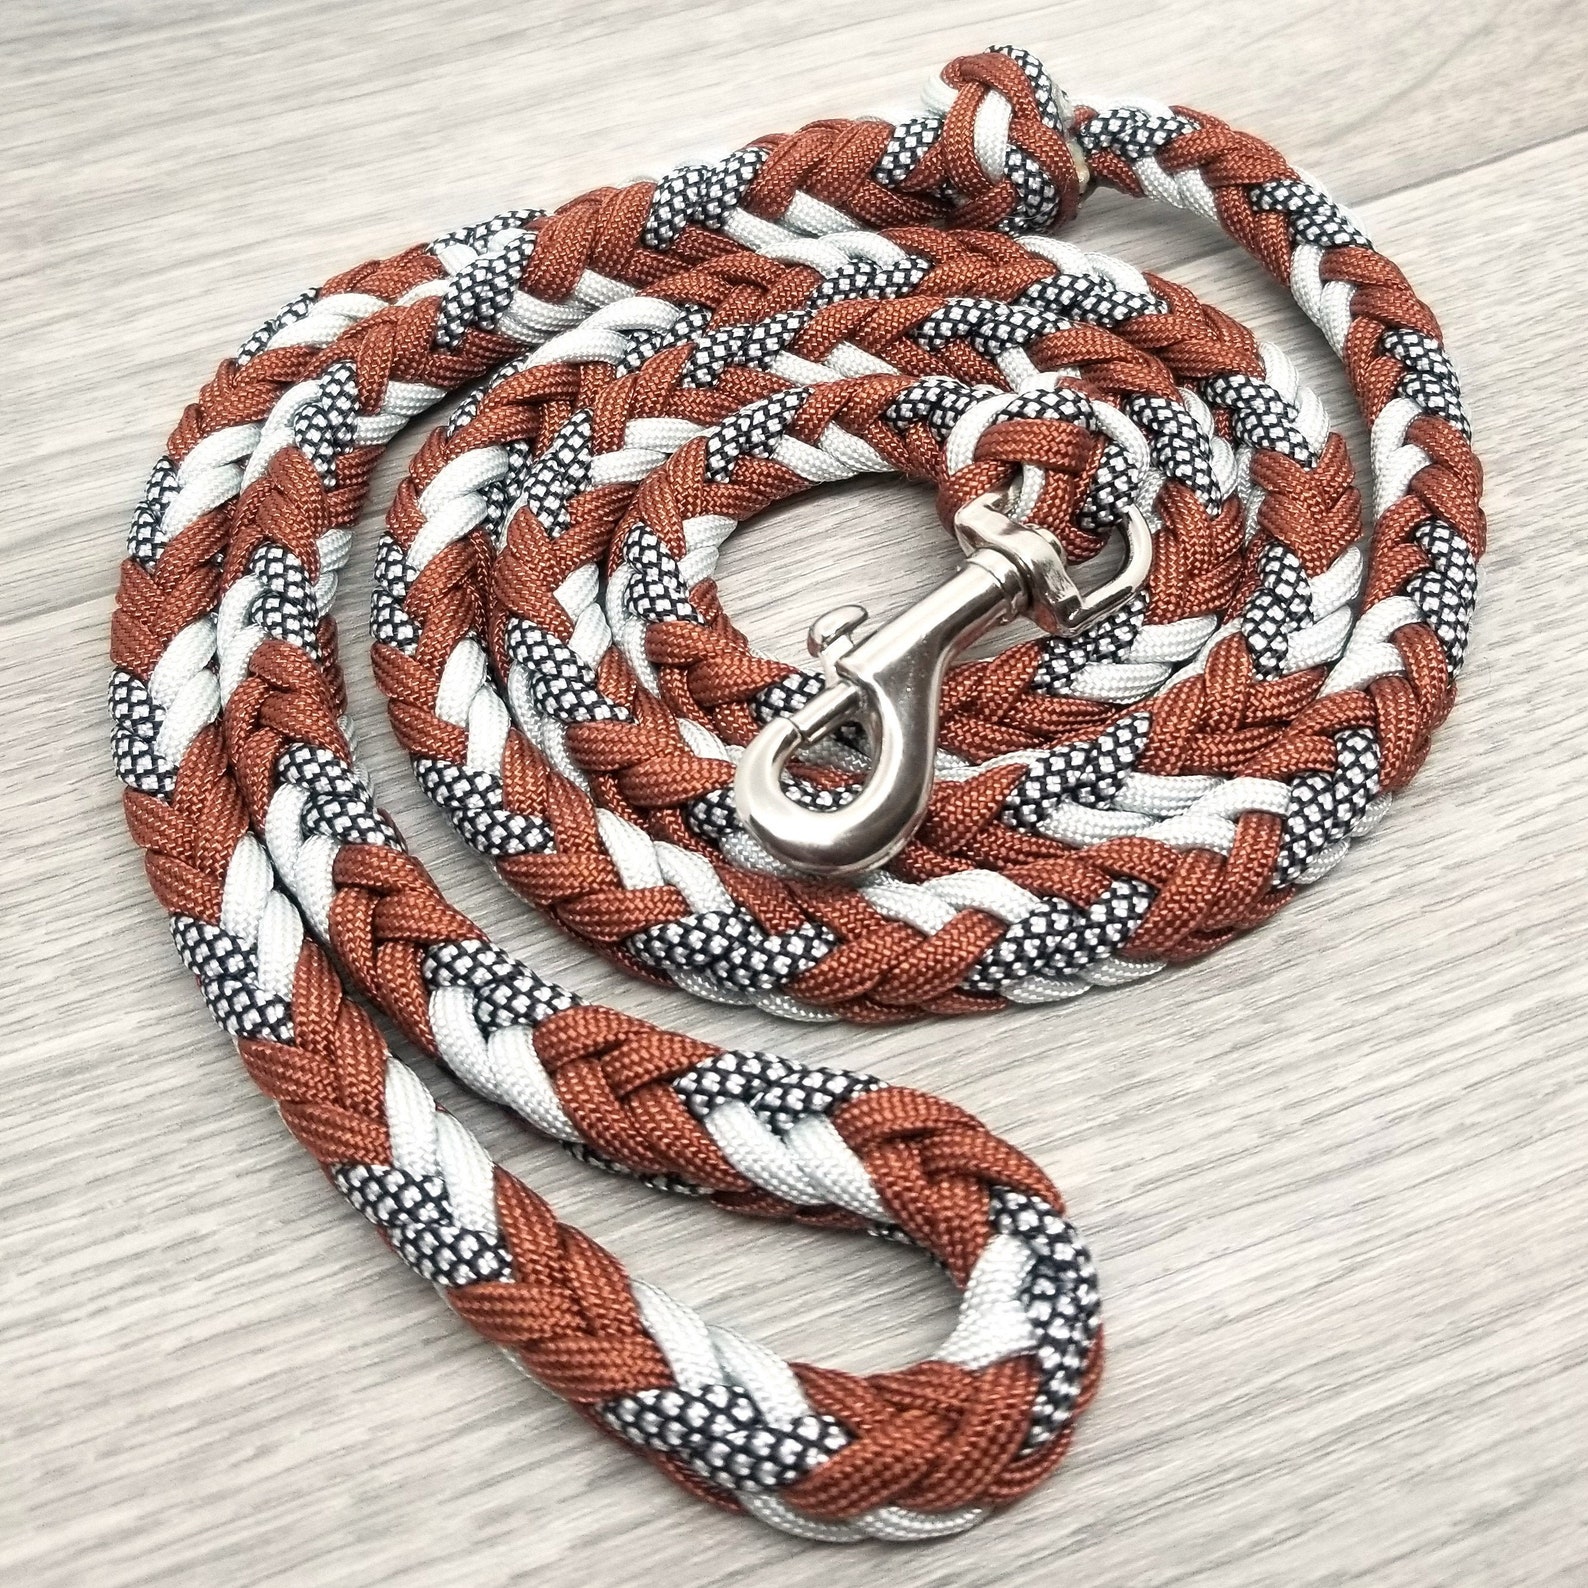 27+ Unique Dog Leashes For All Occasions